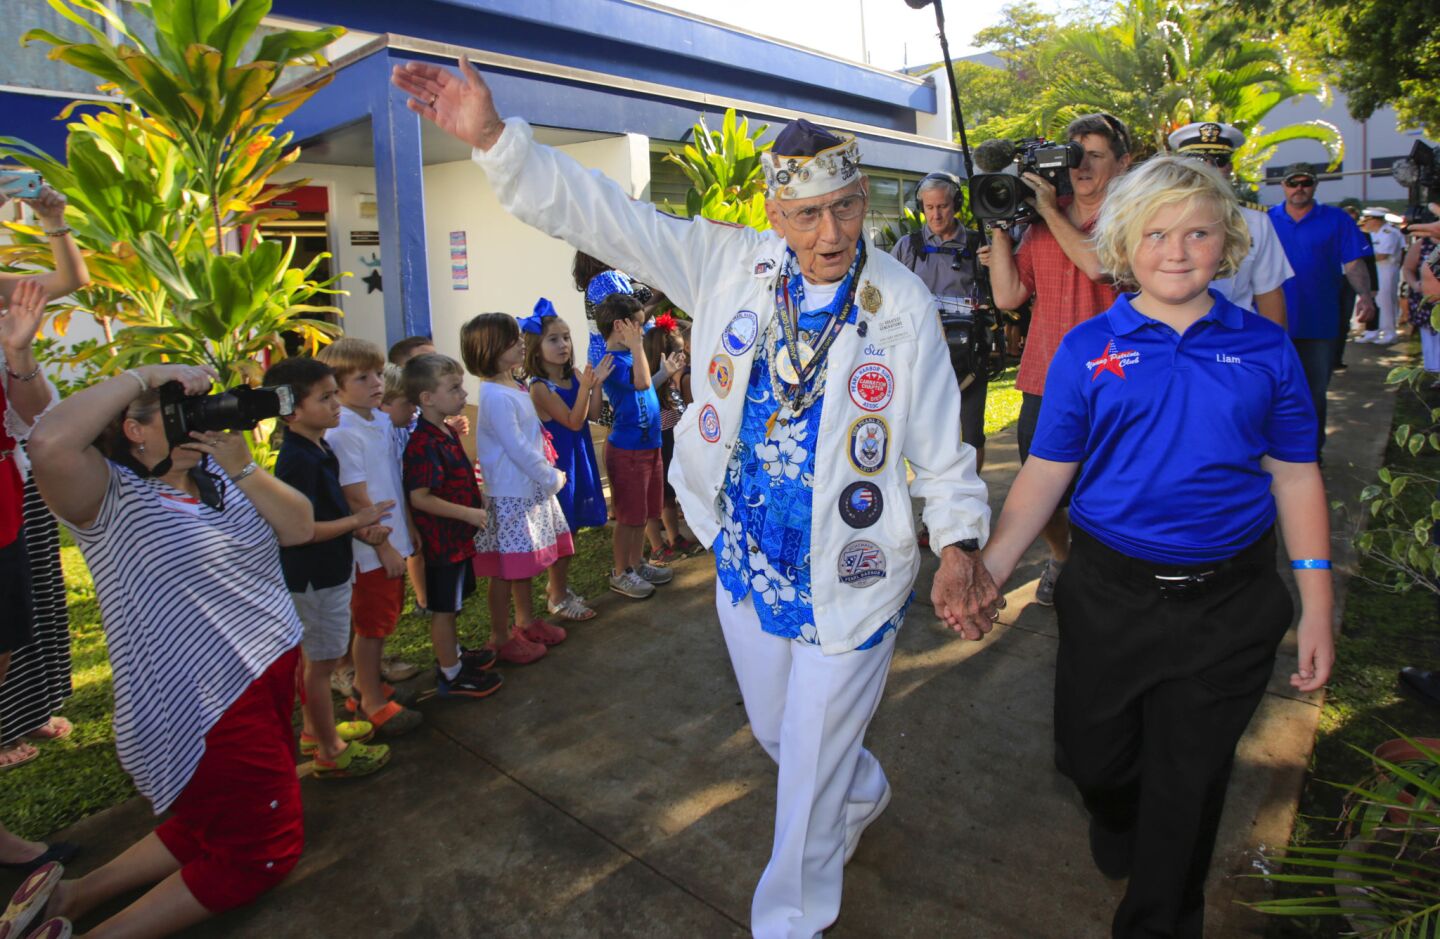 USS West Virginia, 95-year-old Pearl Harbor survivor Stu Hedley acknowledges the students at Navy Hale Keiki School as he arrives at the school escorted by fourth grader Liam Boland. He and about 24 other World War II veterans, sponsored by the Greatest Generations Foundation, of which about 15 are Pearl Harbor survivors, visited with the students, and as Hedley did, some told their stories of survival on December 7, 1941, the day Japan attacked Pearl Harbor thrusting The United States into World War II.